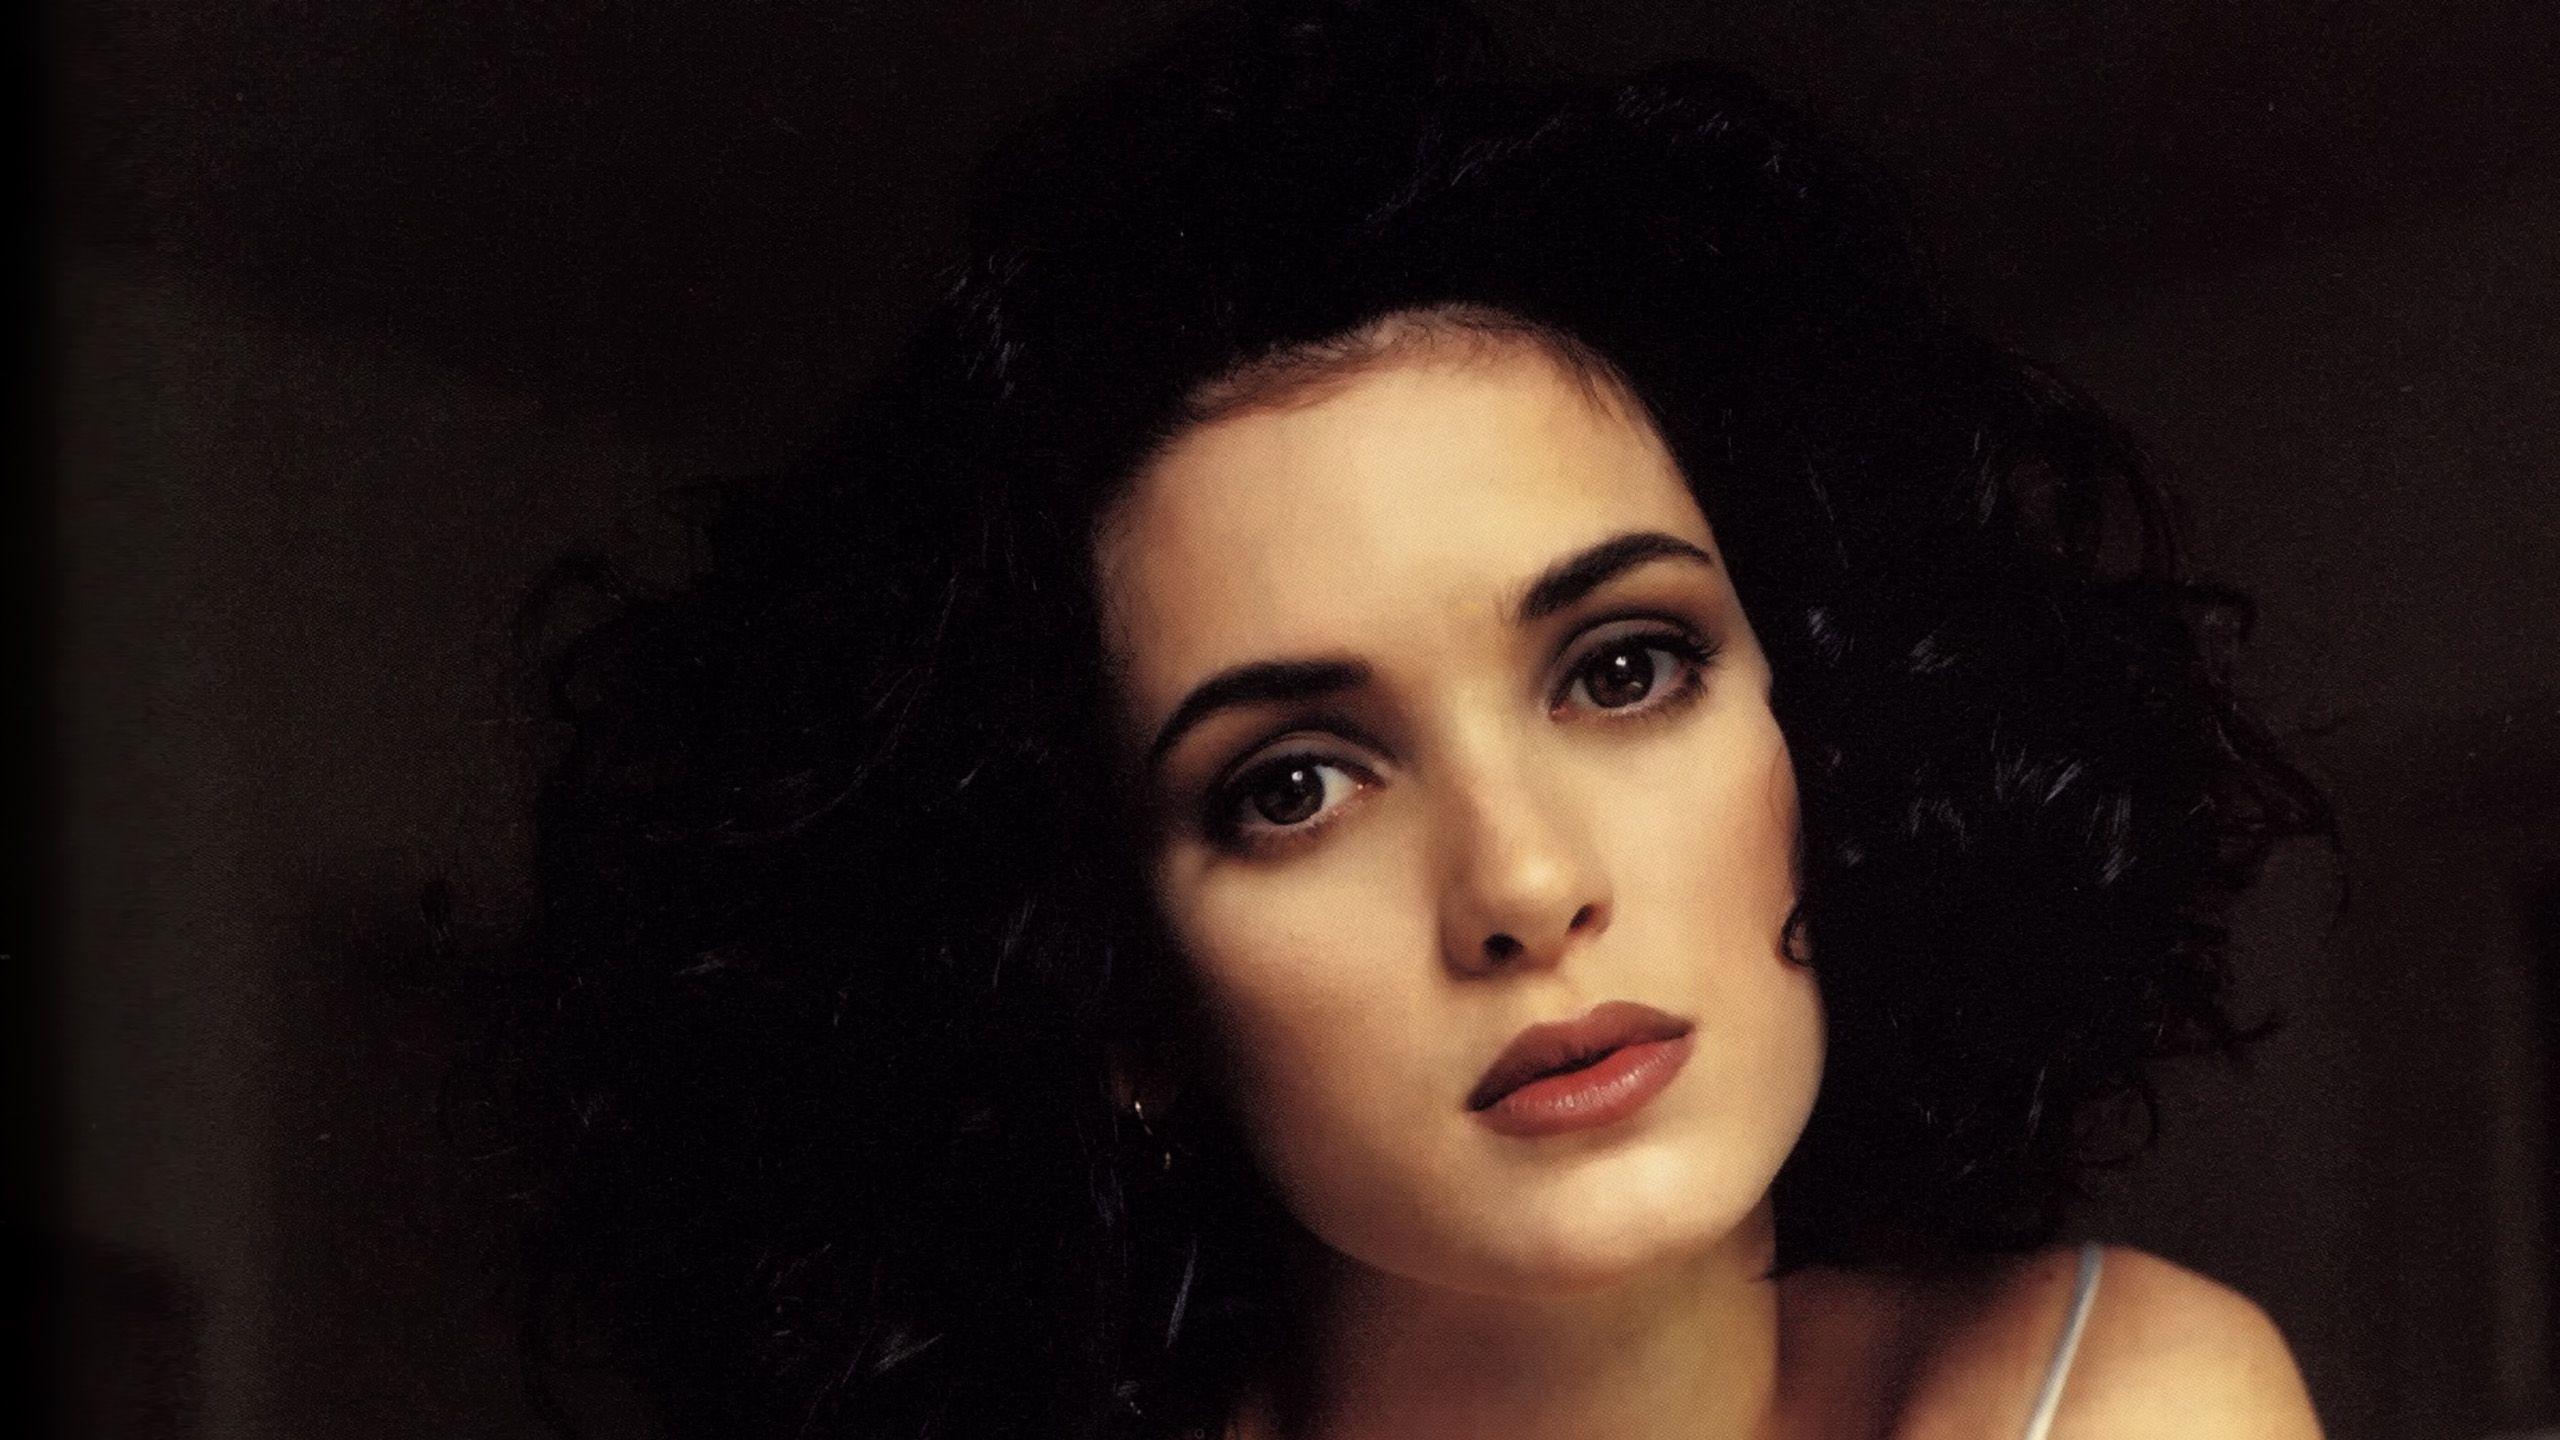 Winona Ryder. Free Desktop Wallpaper for Widescreen, HD and Mobile